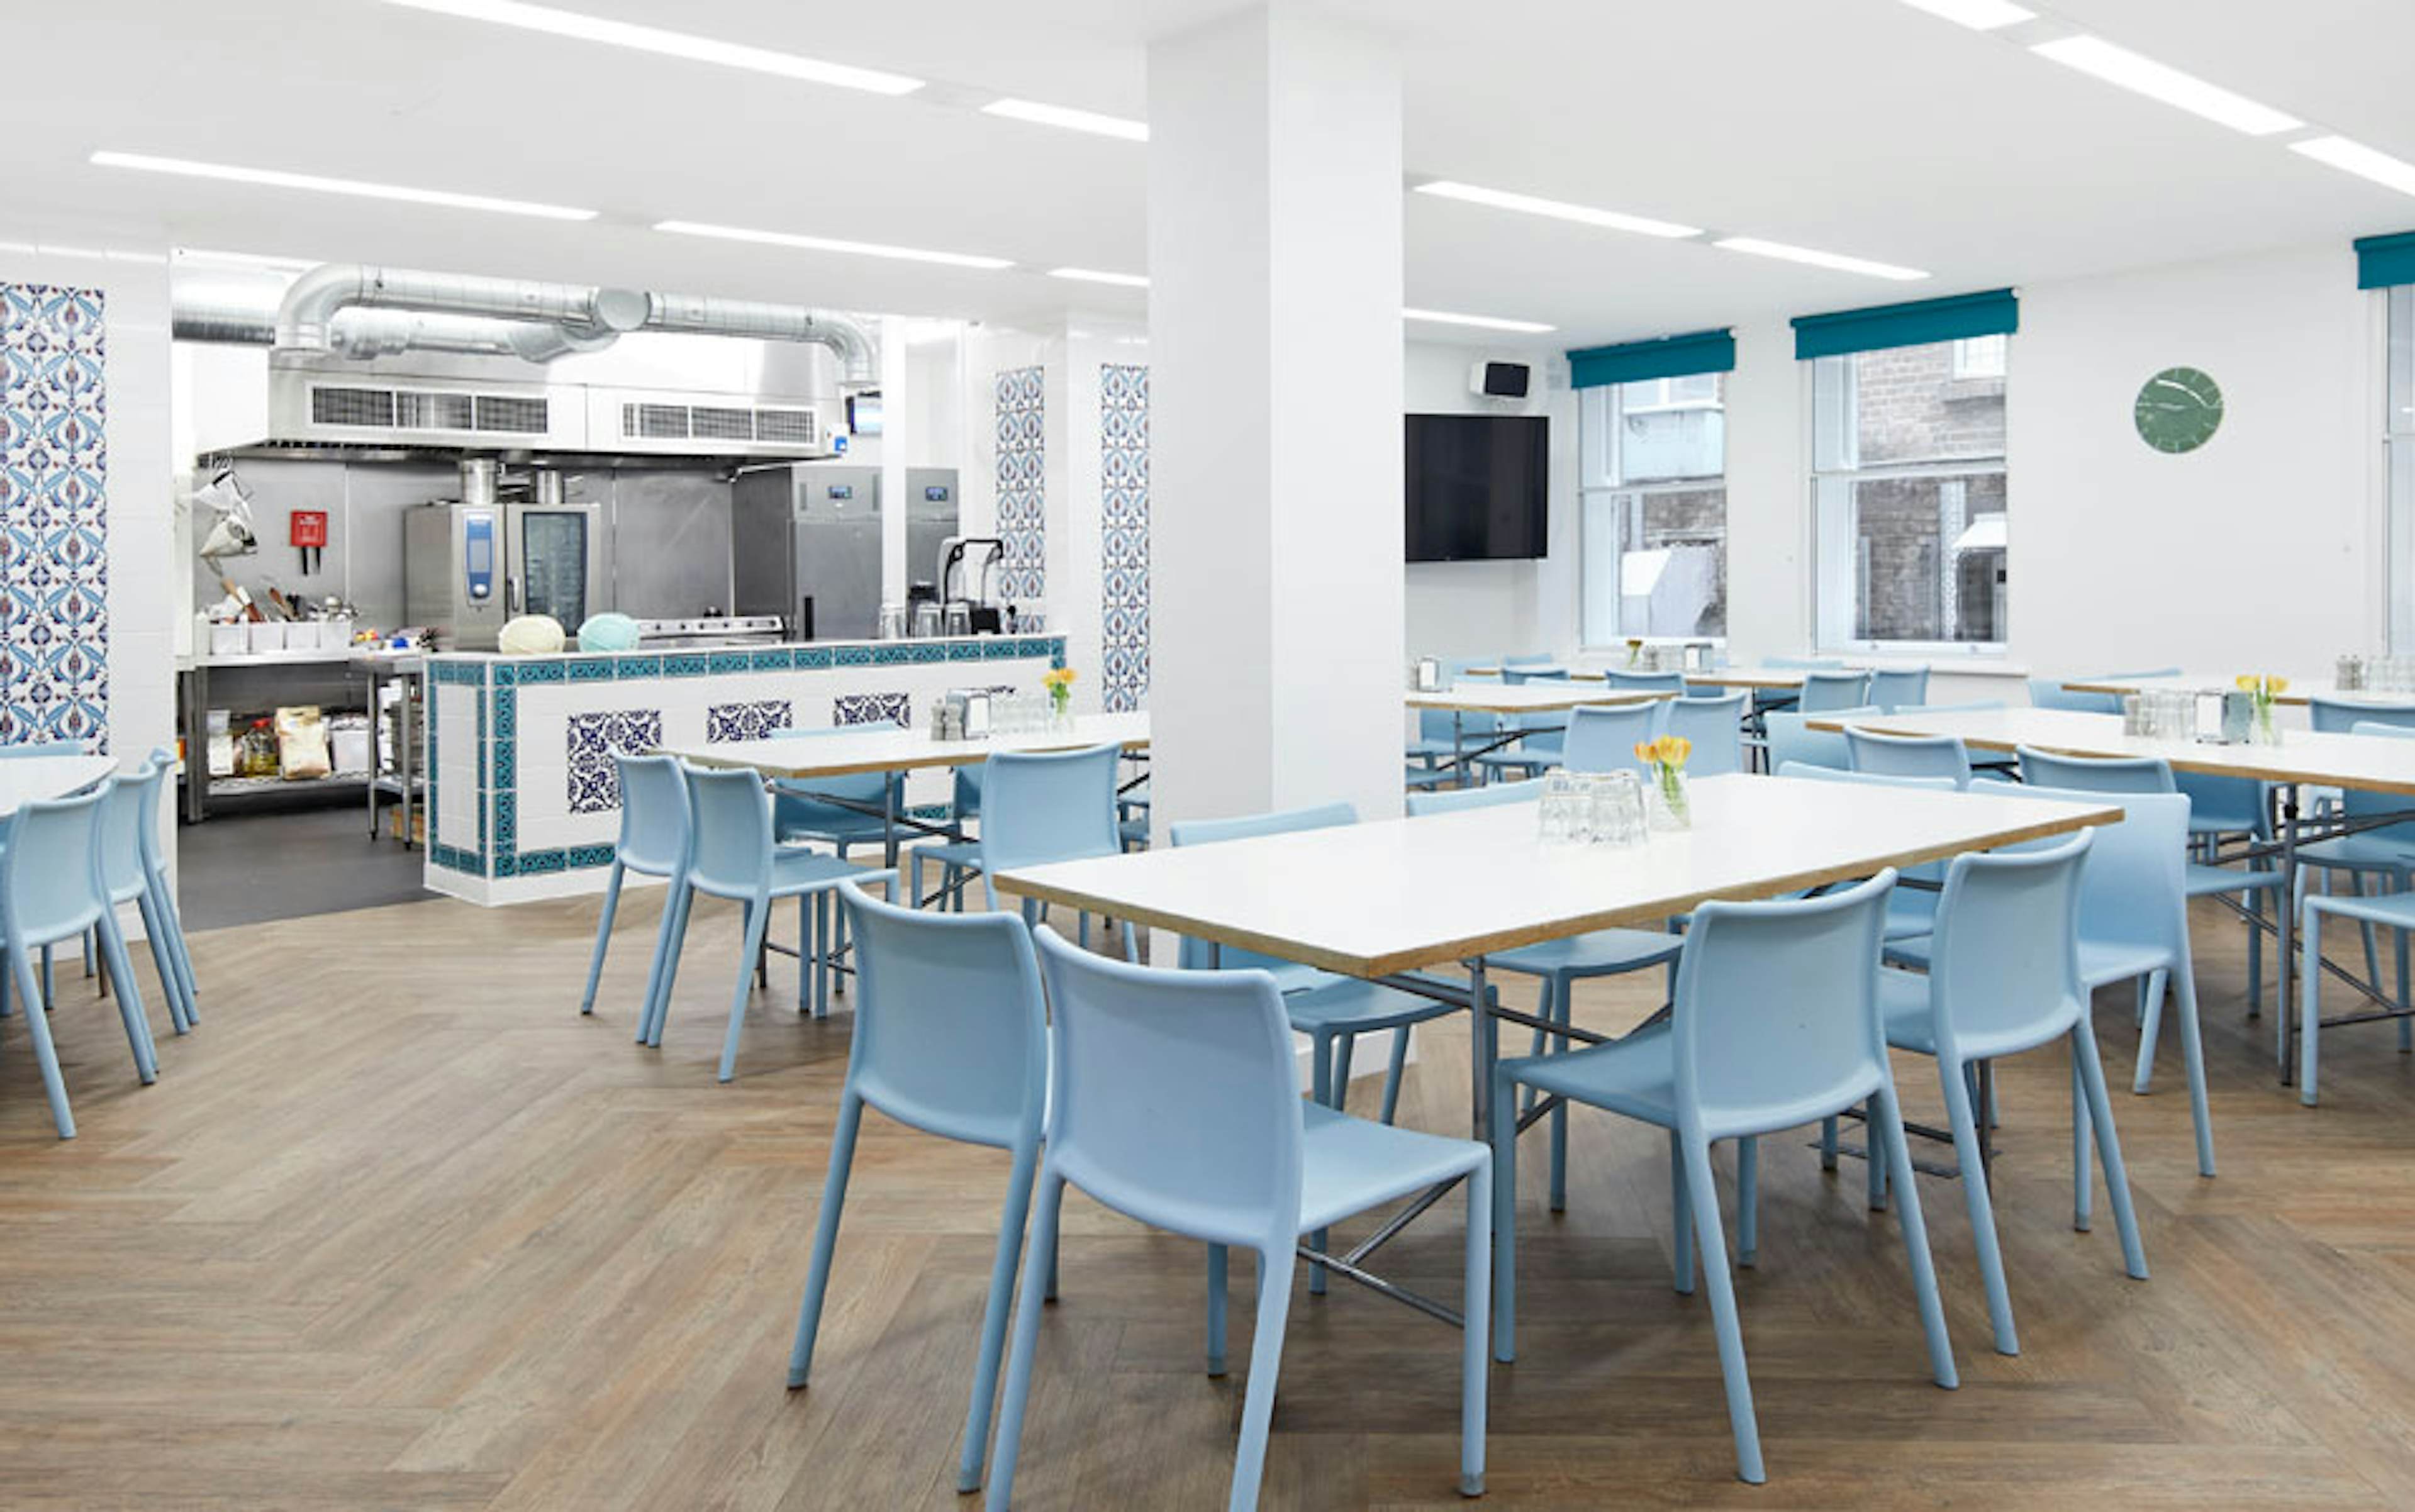 Wallacespace Covent Garden - Covent Garden Kitchen image 1